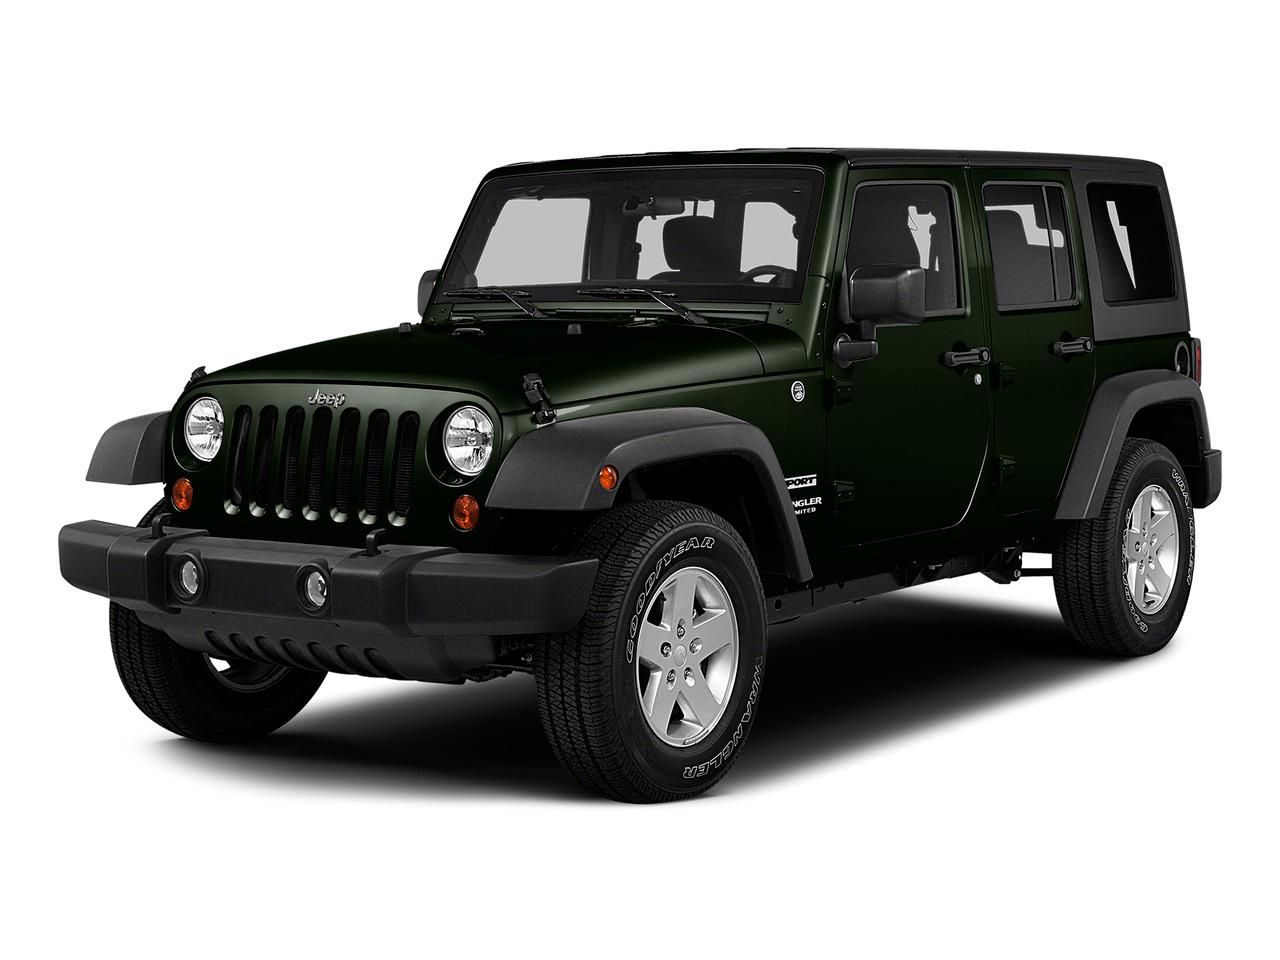 2015 Jeep Wrangler Unlimited Vehicle Photo in Ennis, TX 75119-5114